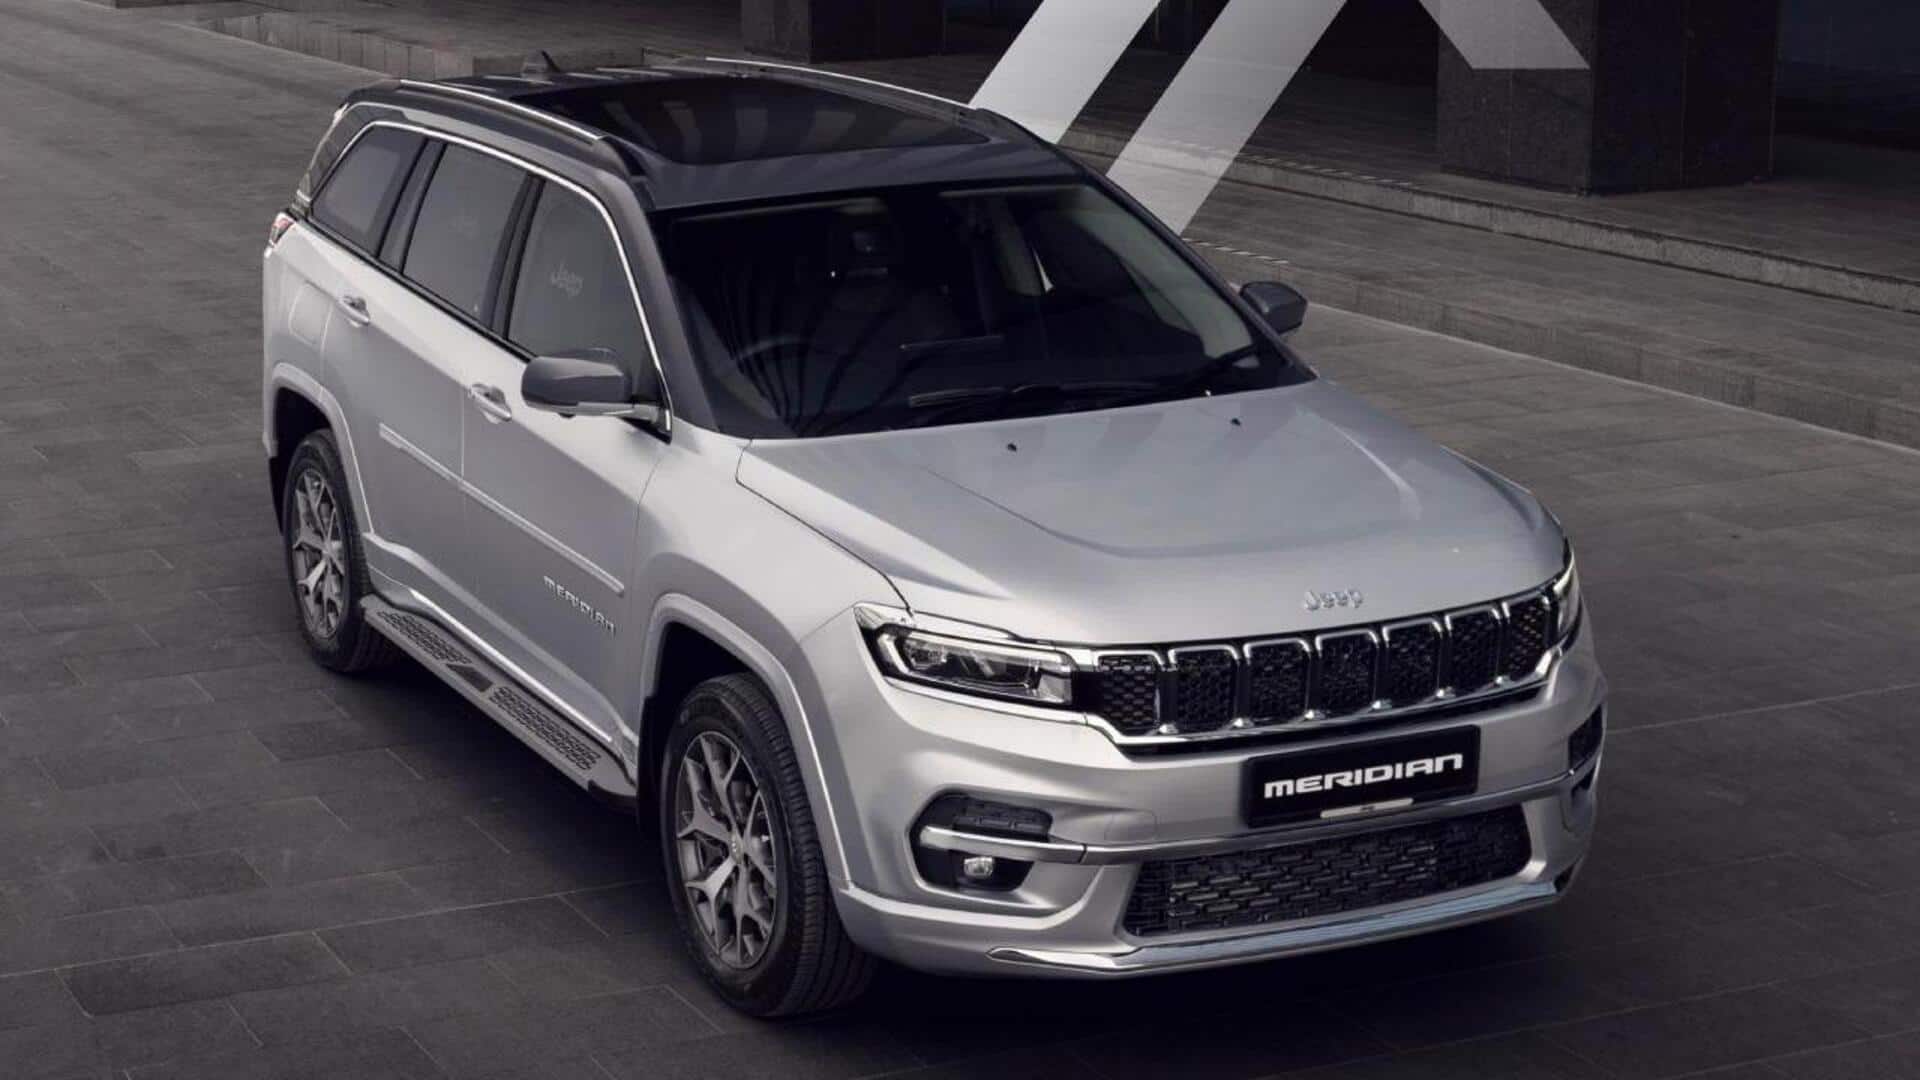 Jeep launches special edition Meridian X SUV at ₹34.27 lakh